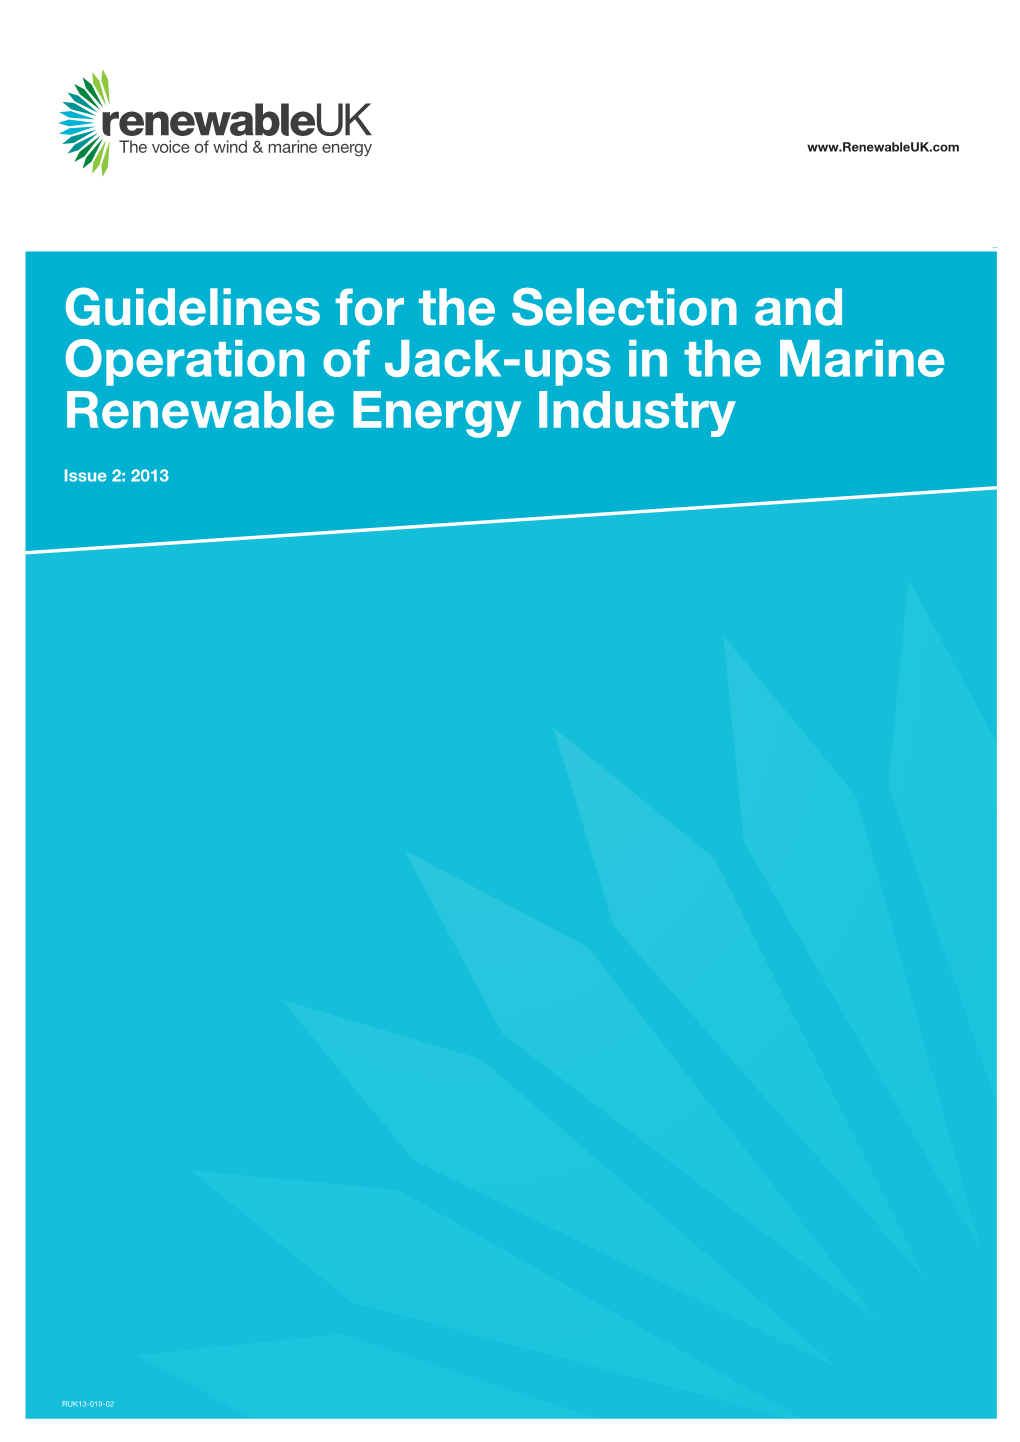 Guidelines for the Selection and Operation of Jack-Ups in the Marine Renewable Energy Industry